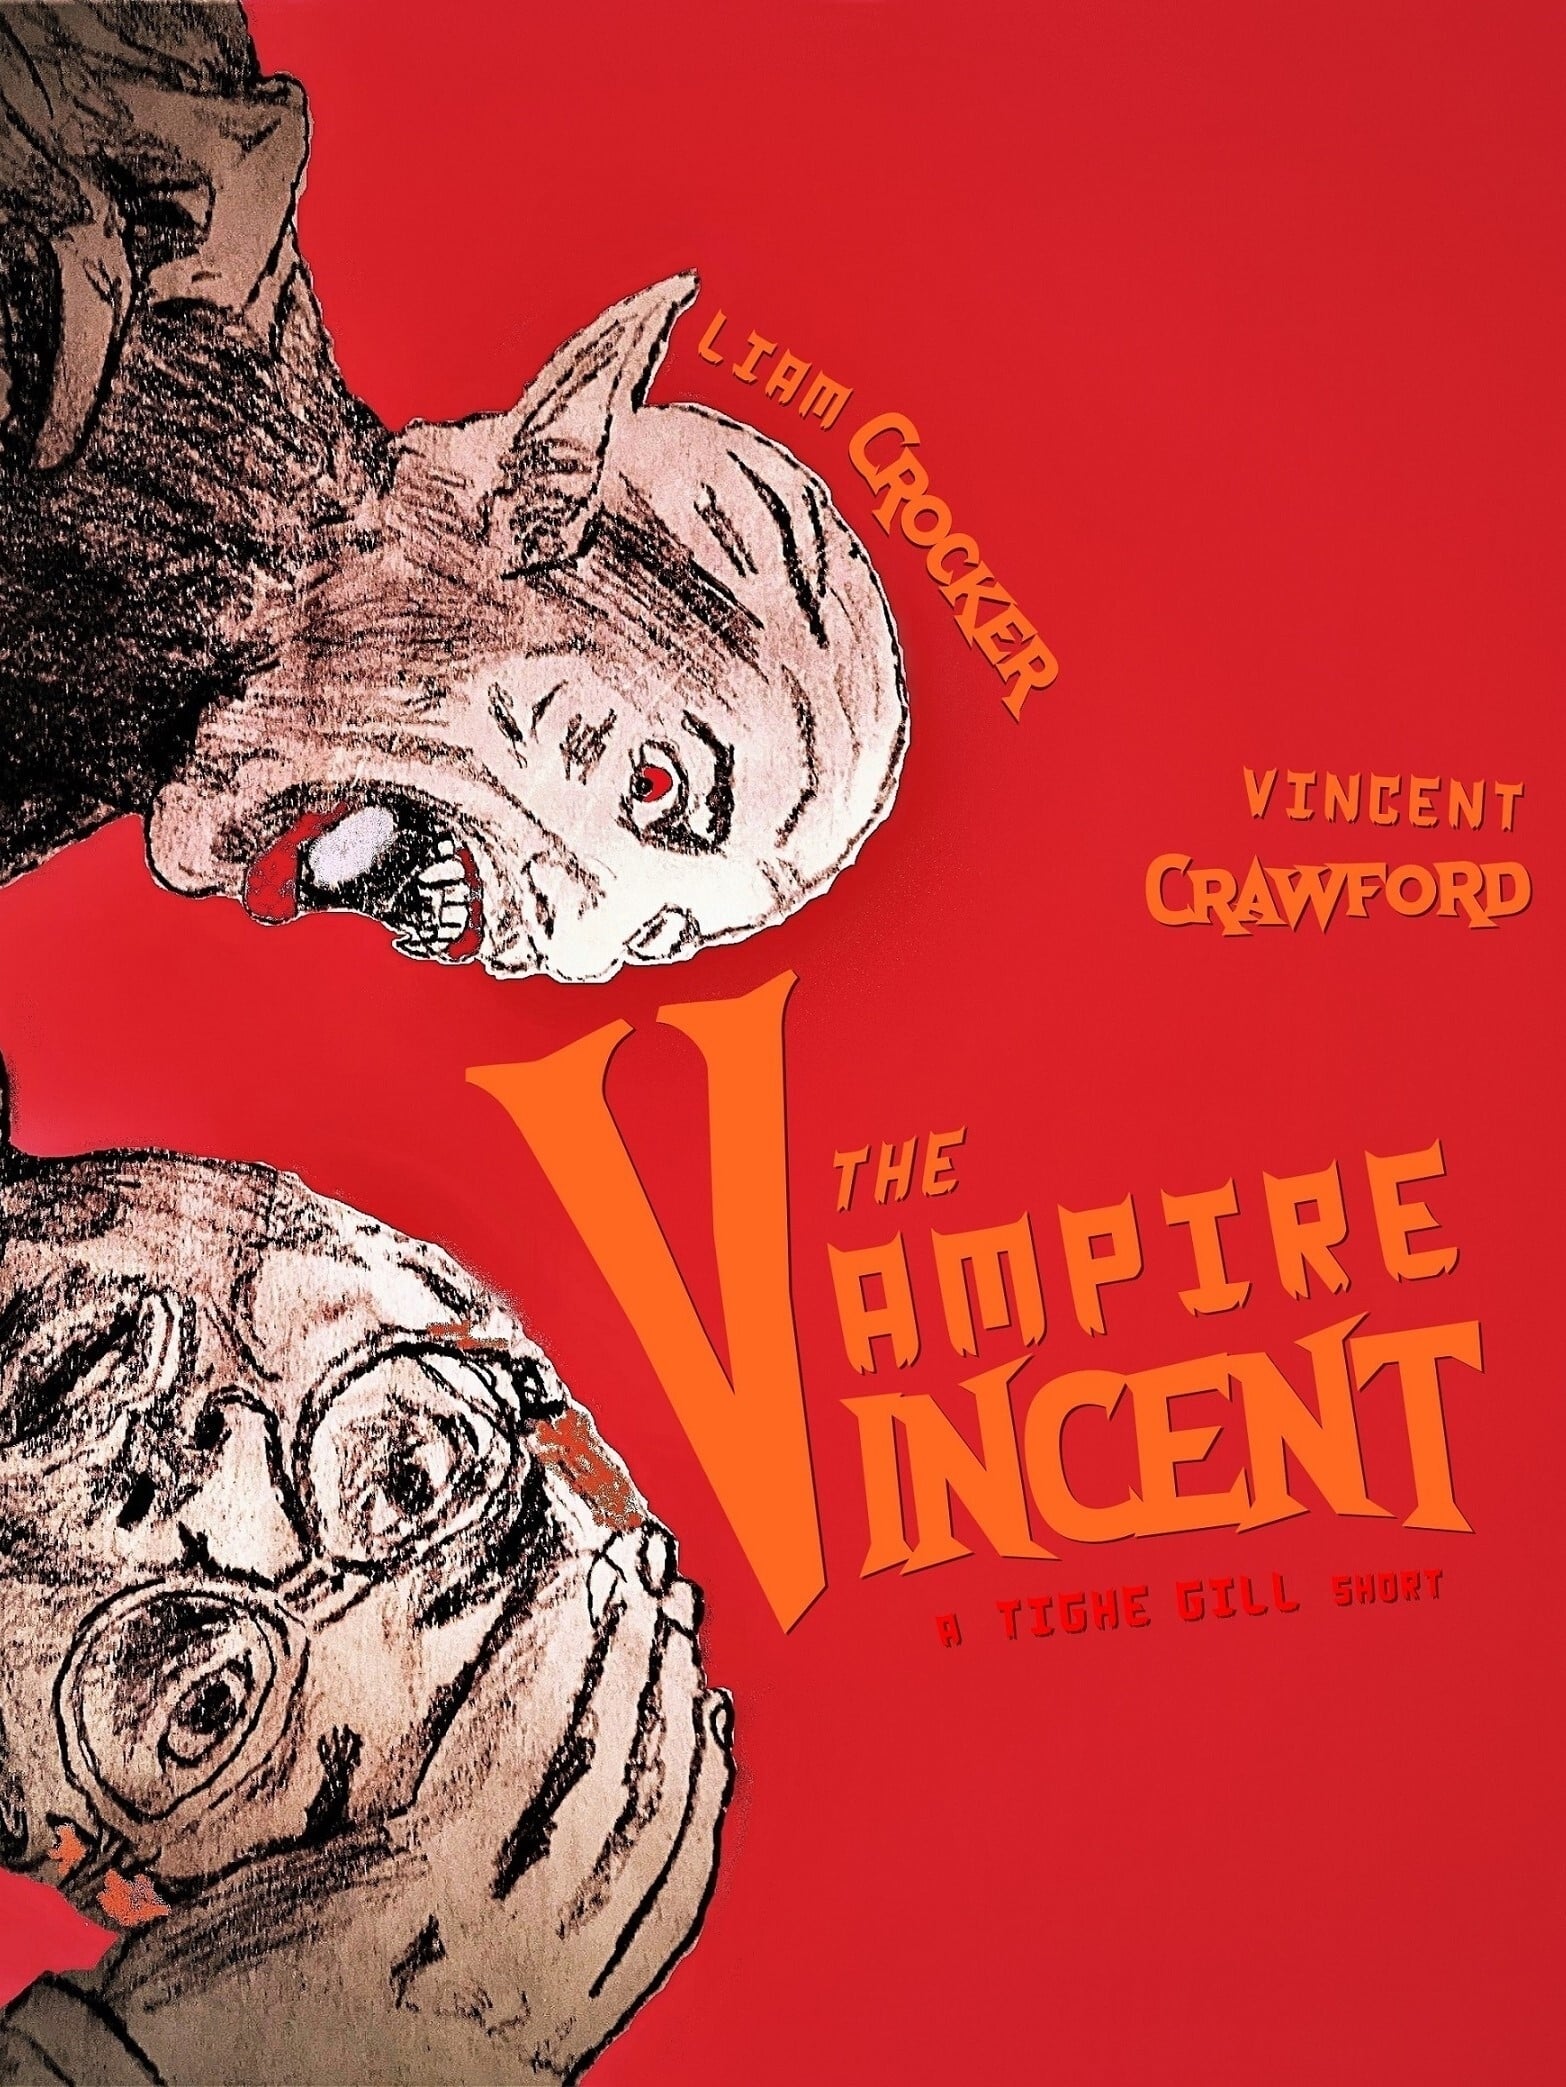 The Vampire, Vincent